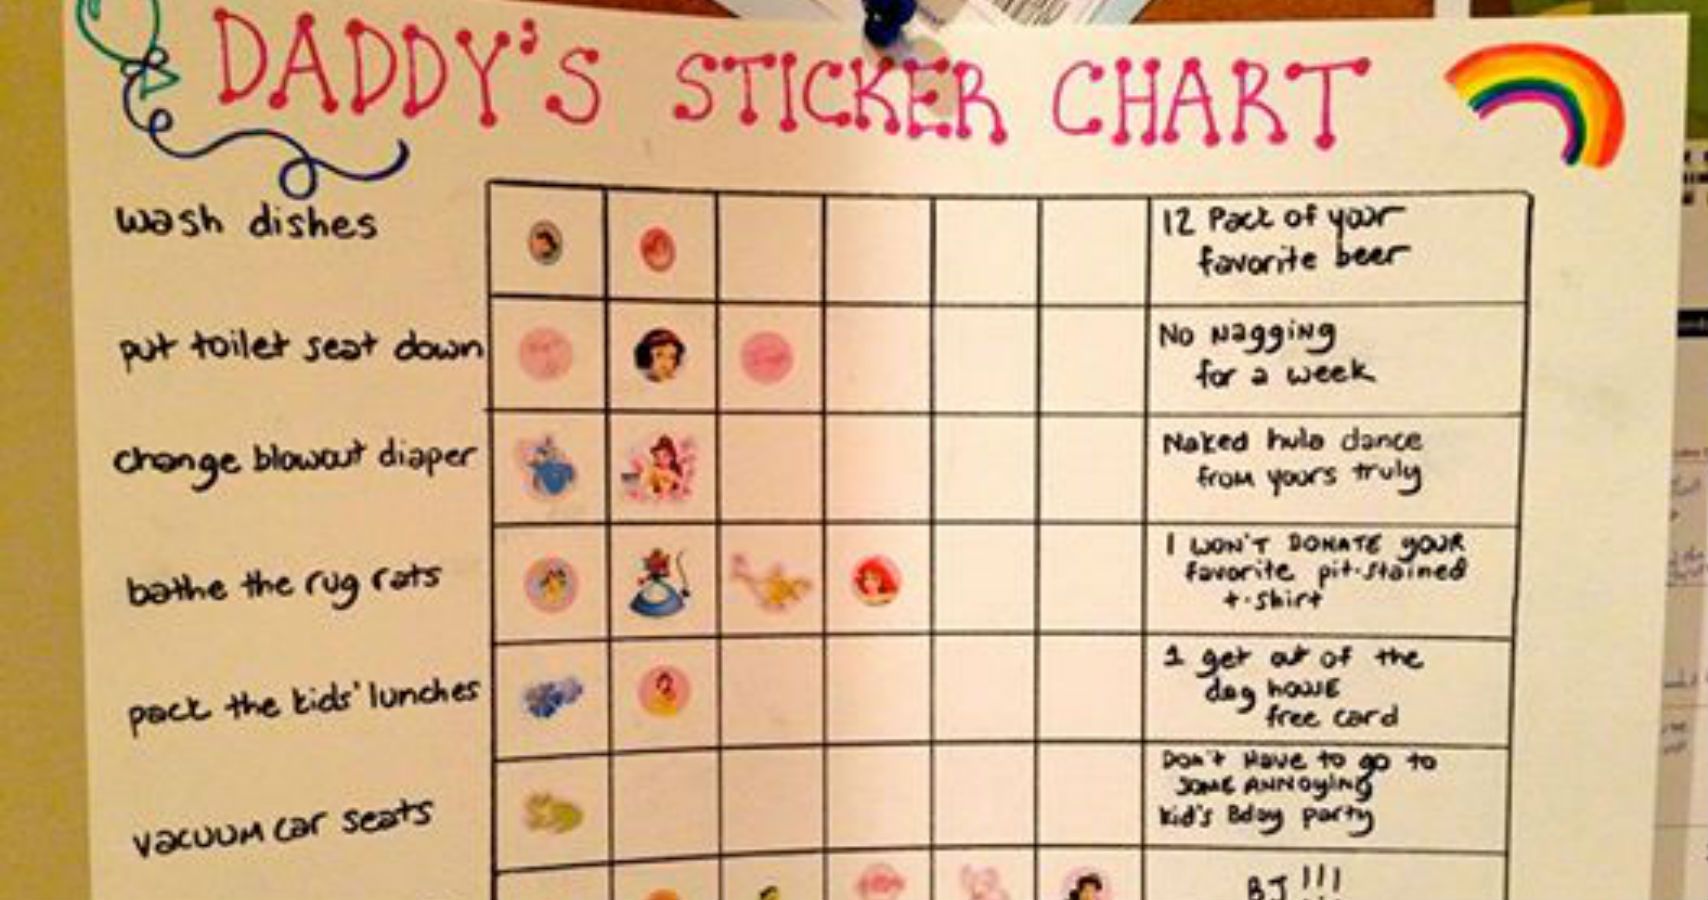 Creator Of Viral 'Daddy's Sticker Chart' Giving Husbands Booze